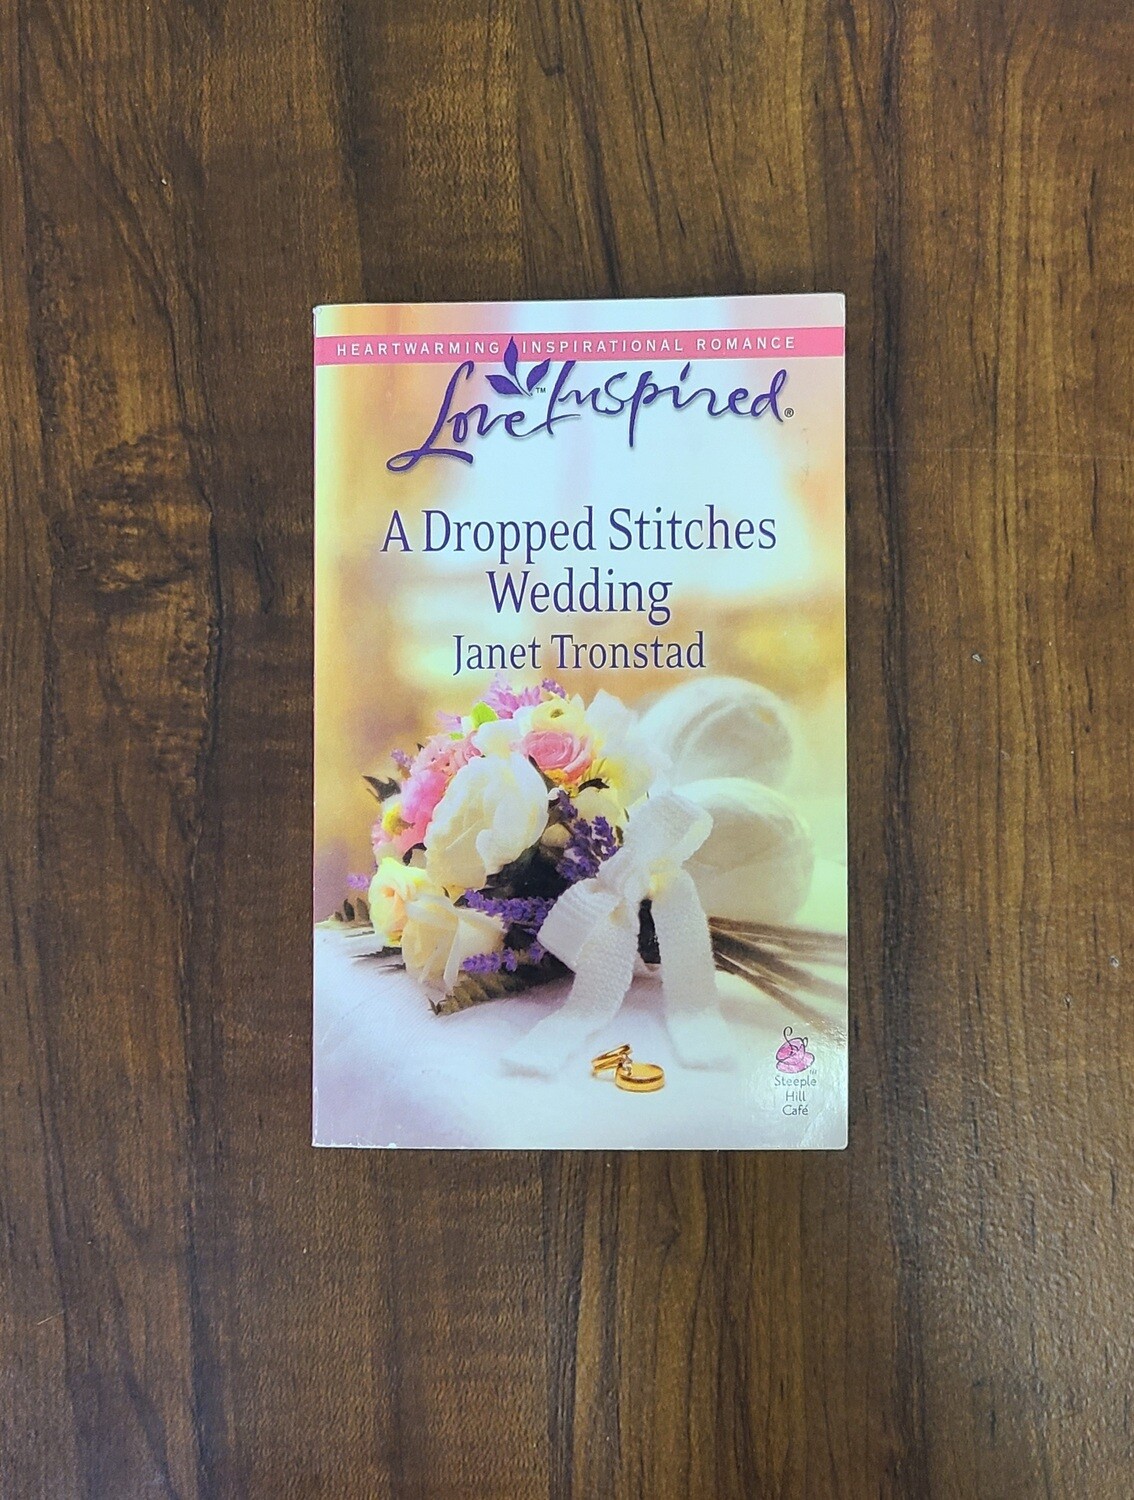 A Dropped Stitches Wedding by Janet Tronstad